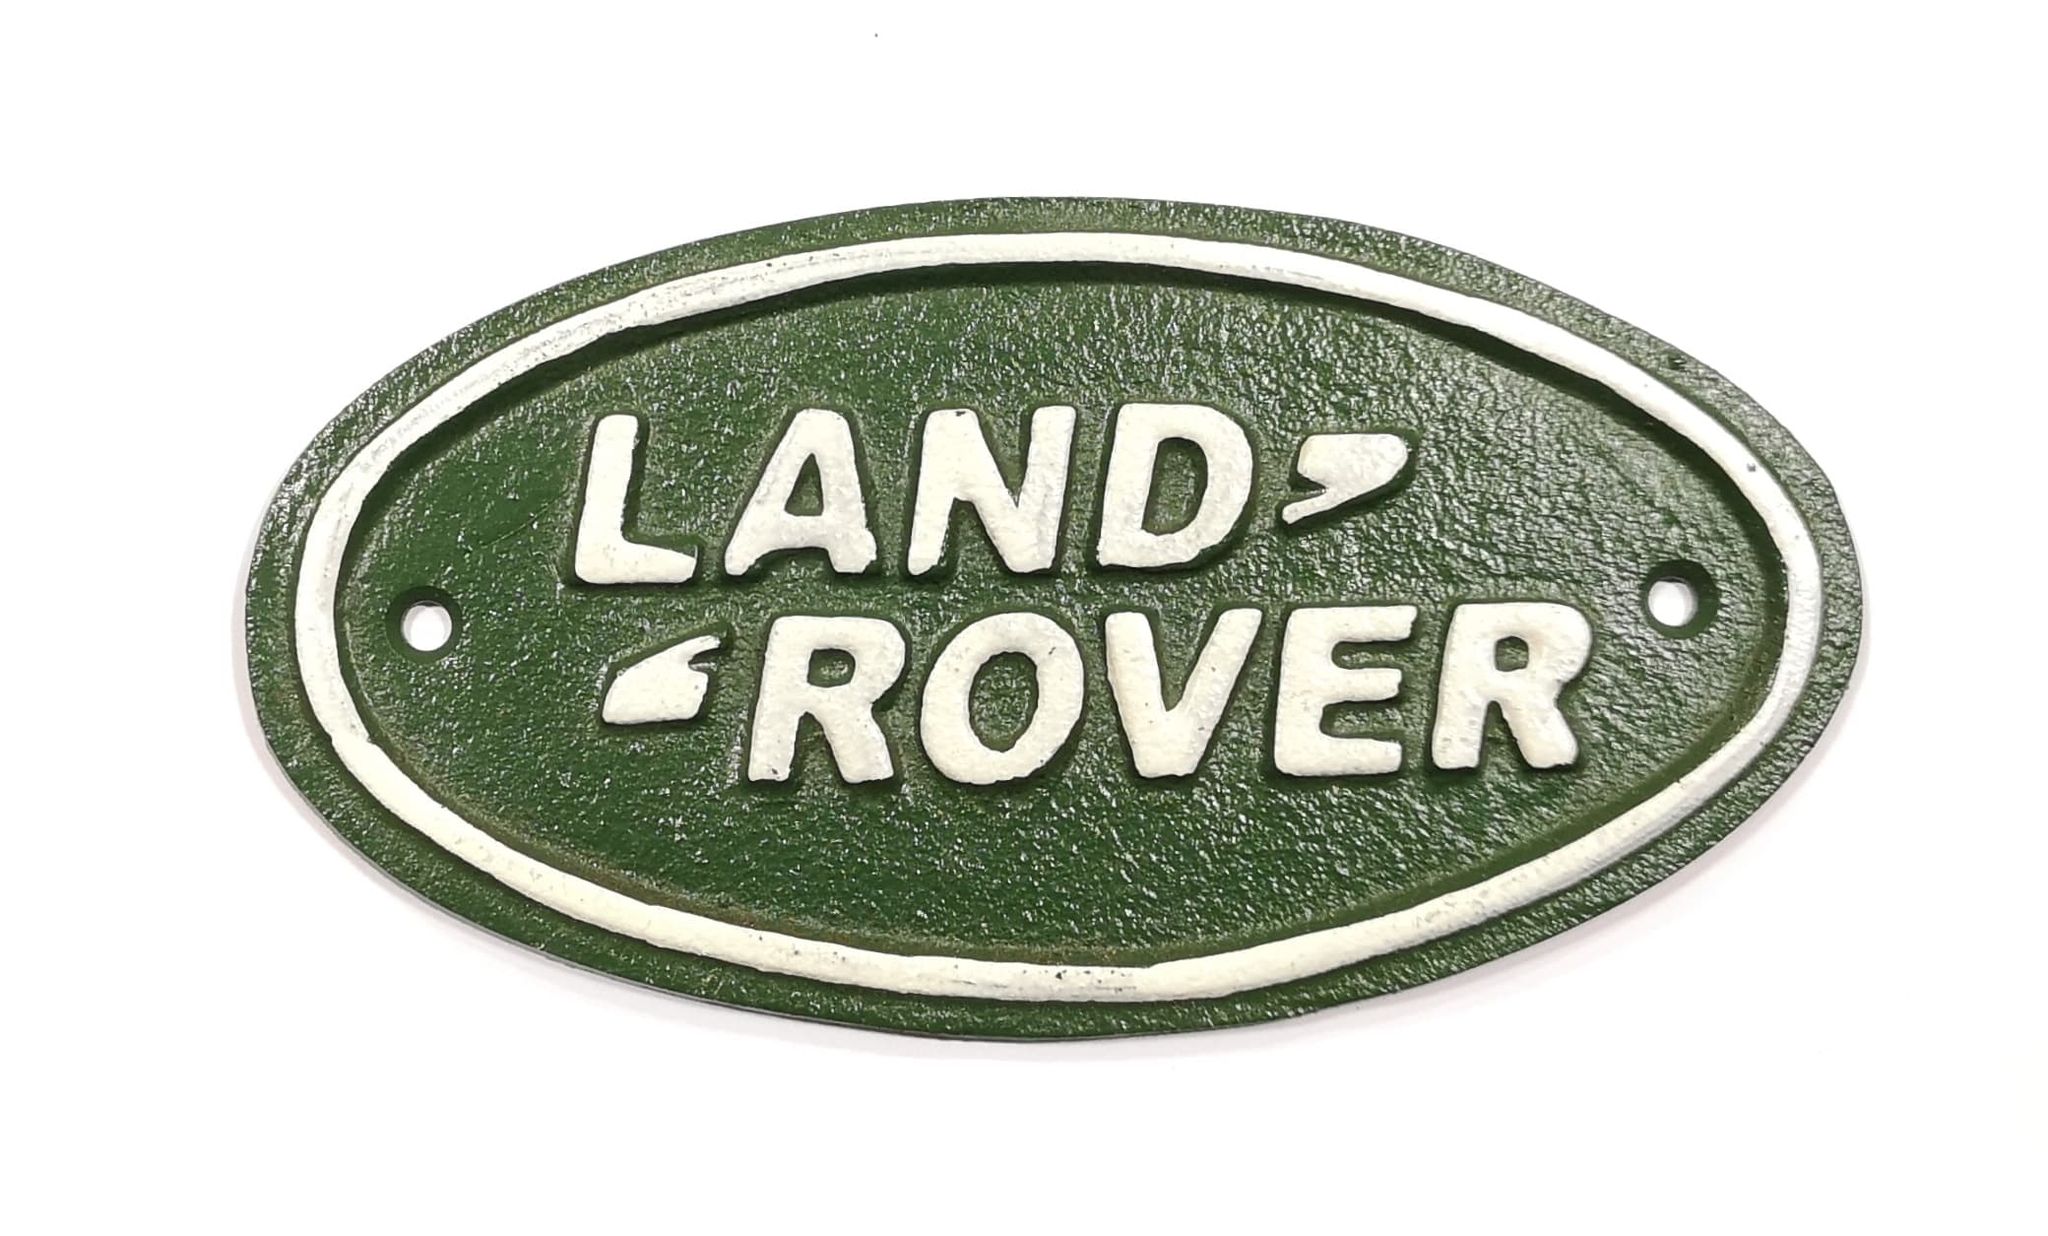 Land Rover Cast Iron Vintage Garage Advertising Wall Plaque Sign 17cm x 9cm